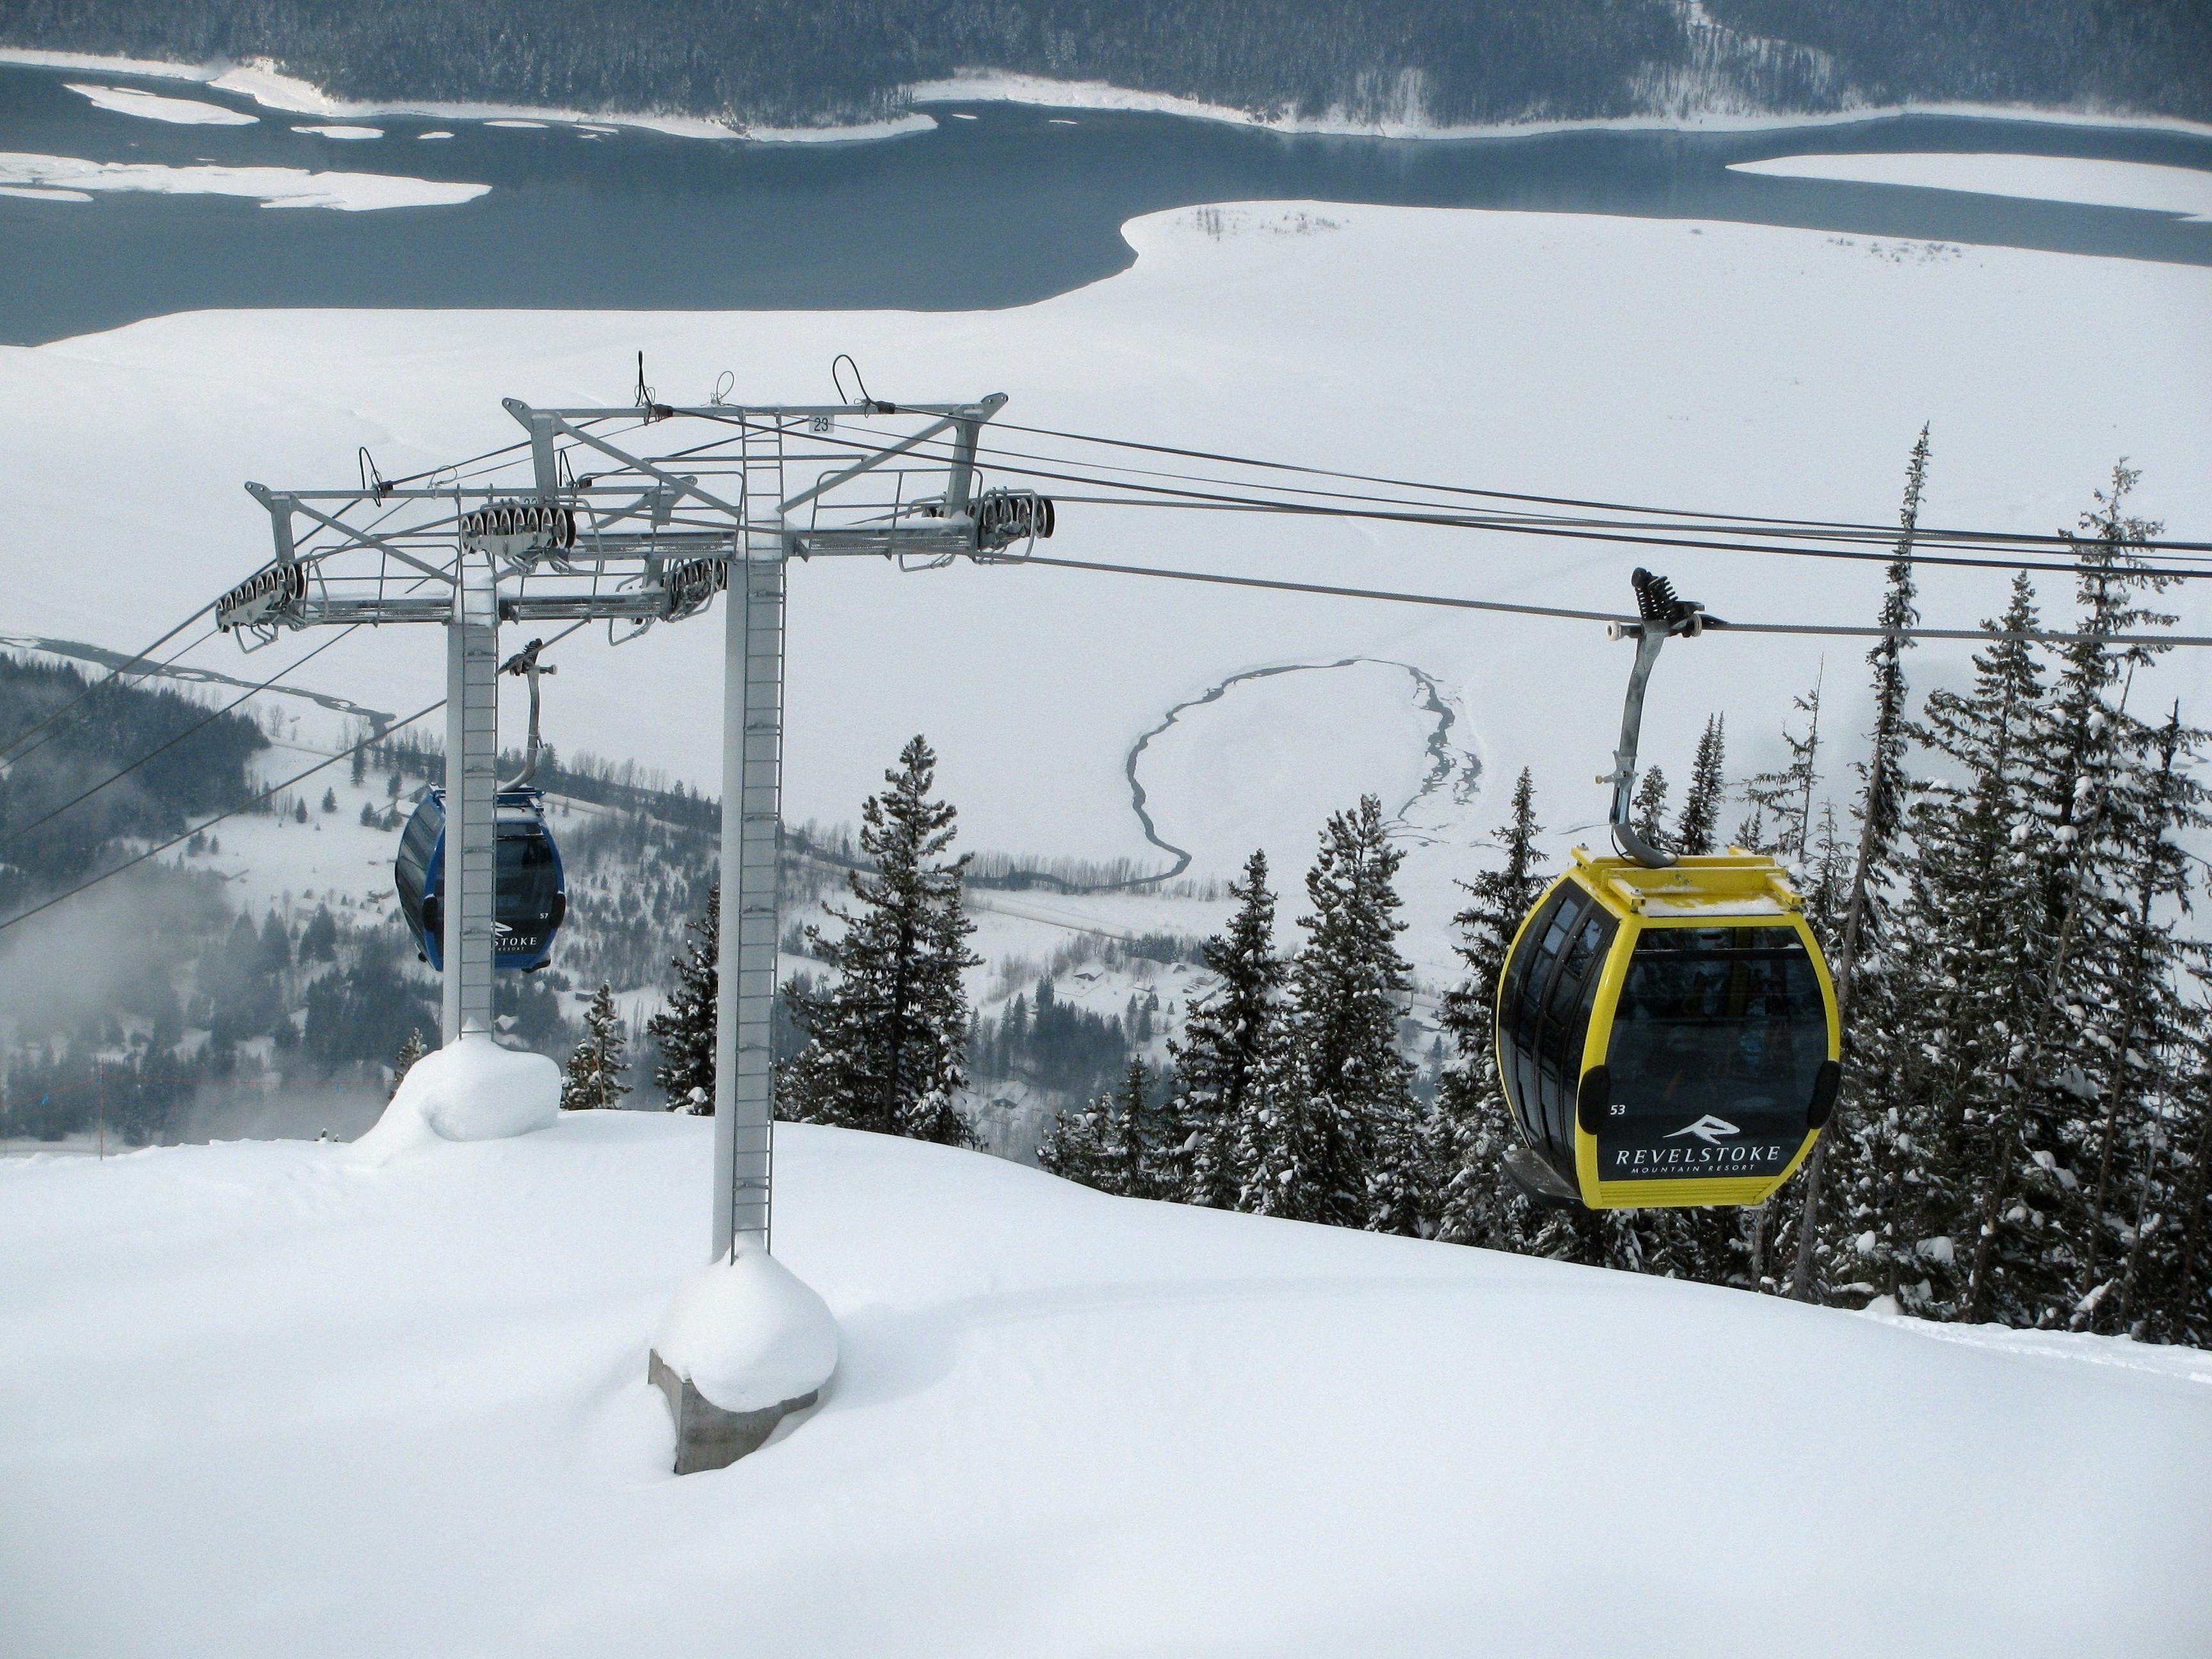 Revelstoke’s gondola with the Columbia River in the background.